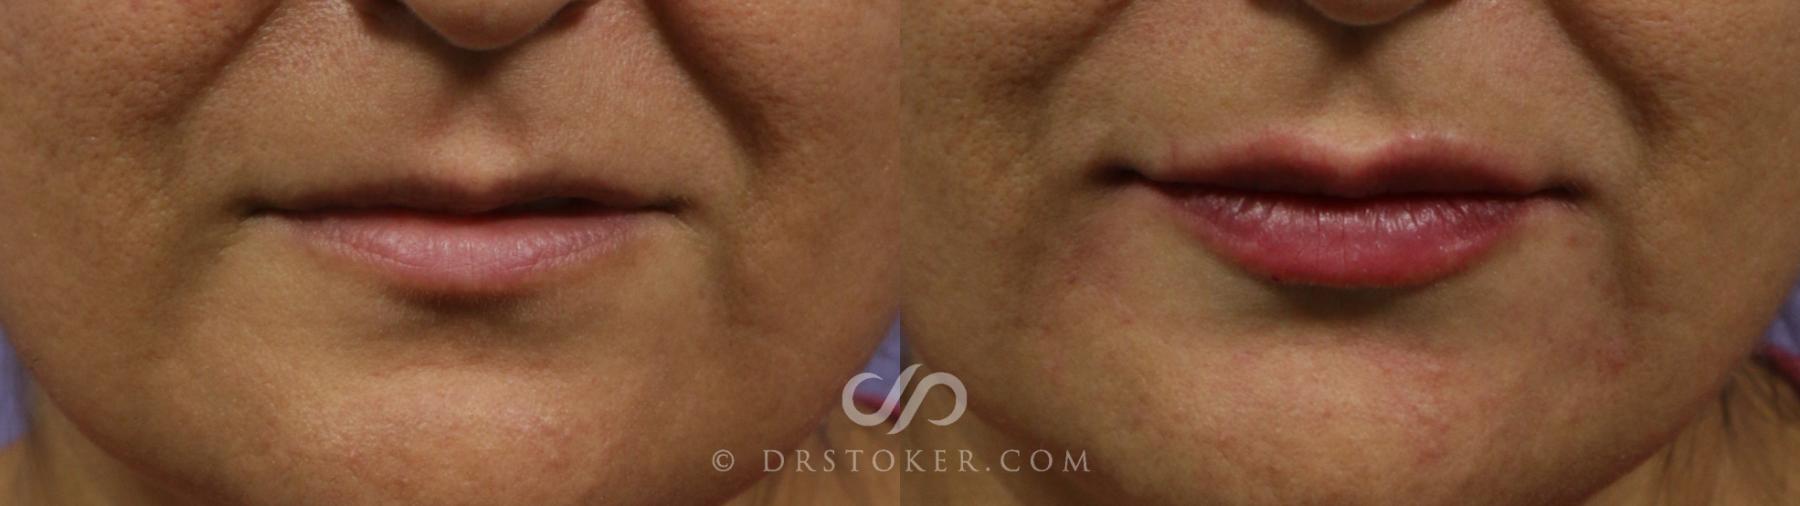 Before & After Lip Fillers/Augmentation Case 1869 Front View in Los Angeles, CA